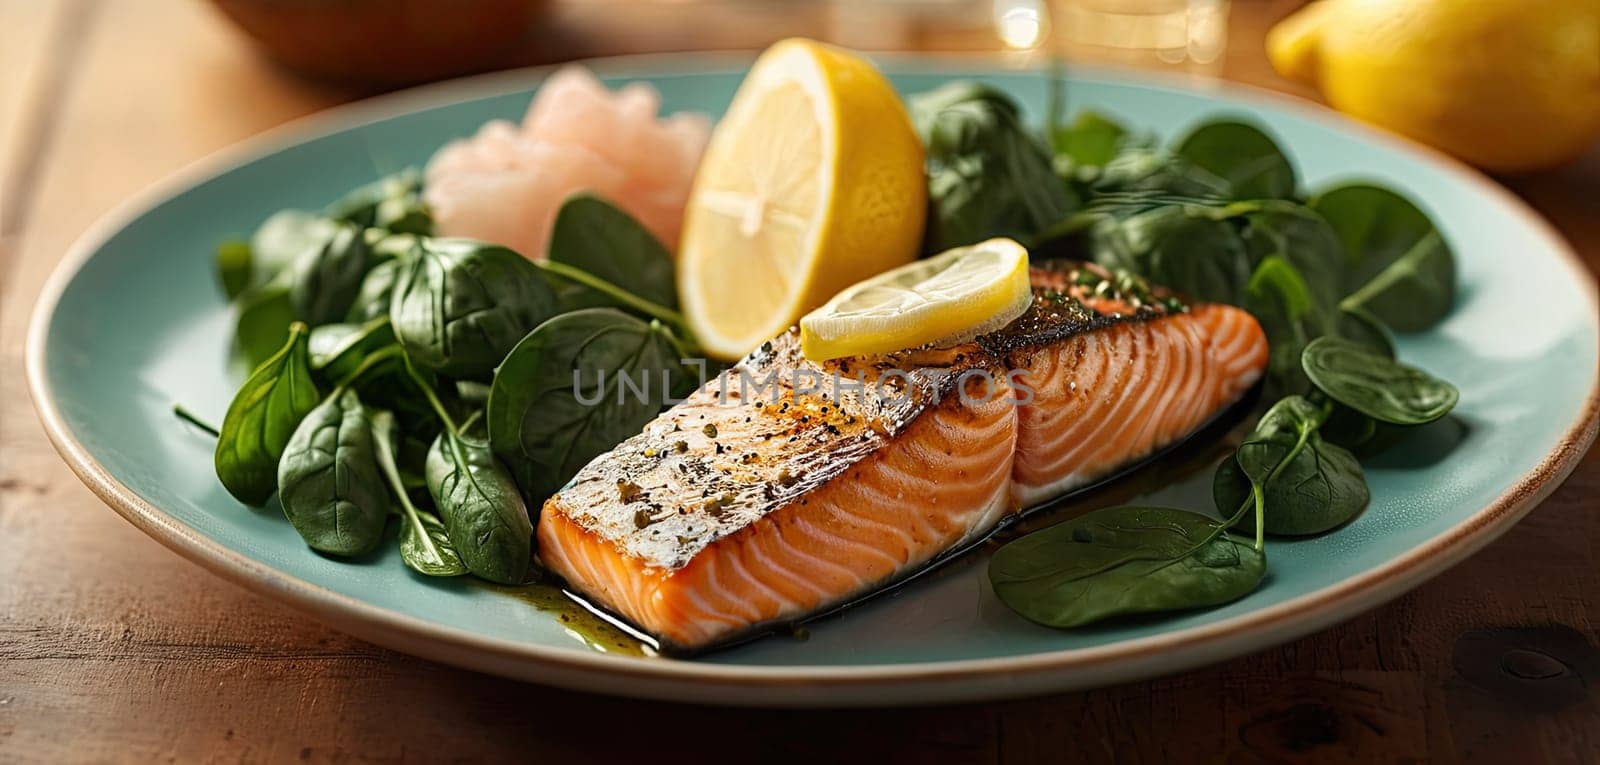 Salmon steak, spinach, lemon. Grilled salmon steak with grill marks, served with fresh spinach and lemon slices, steam rising